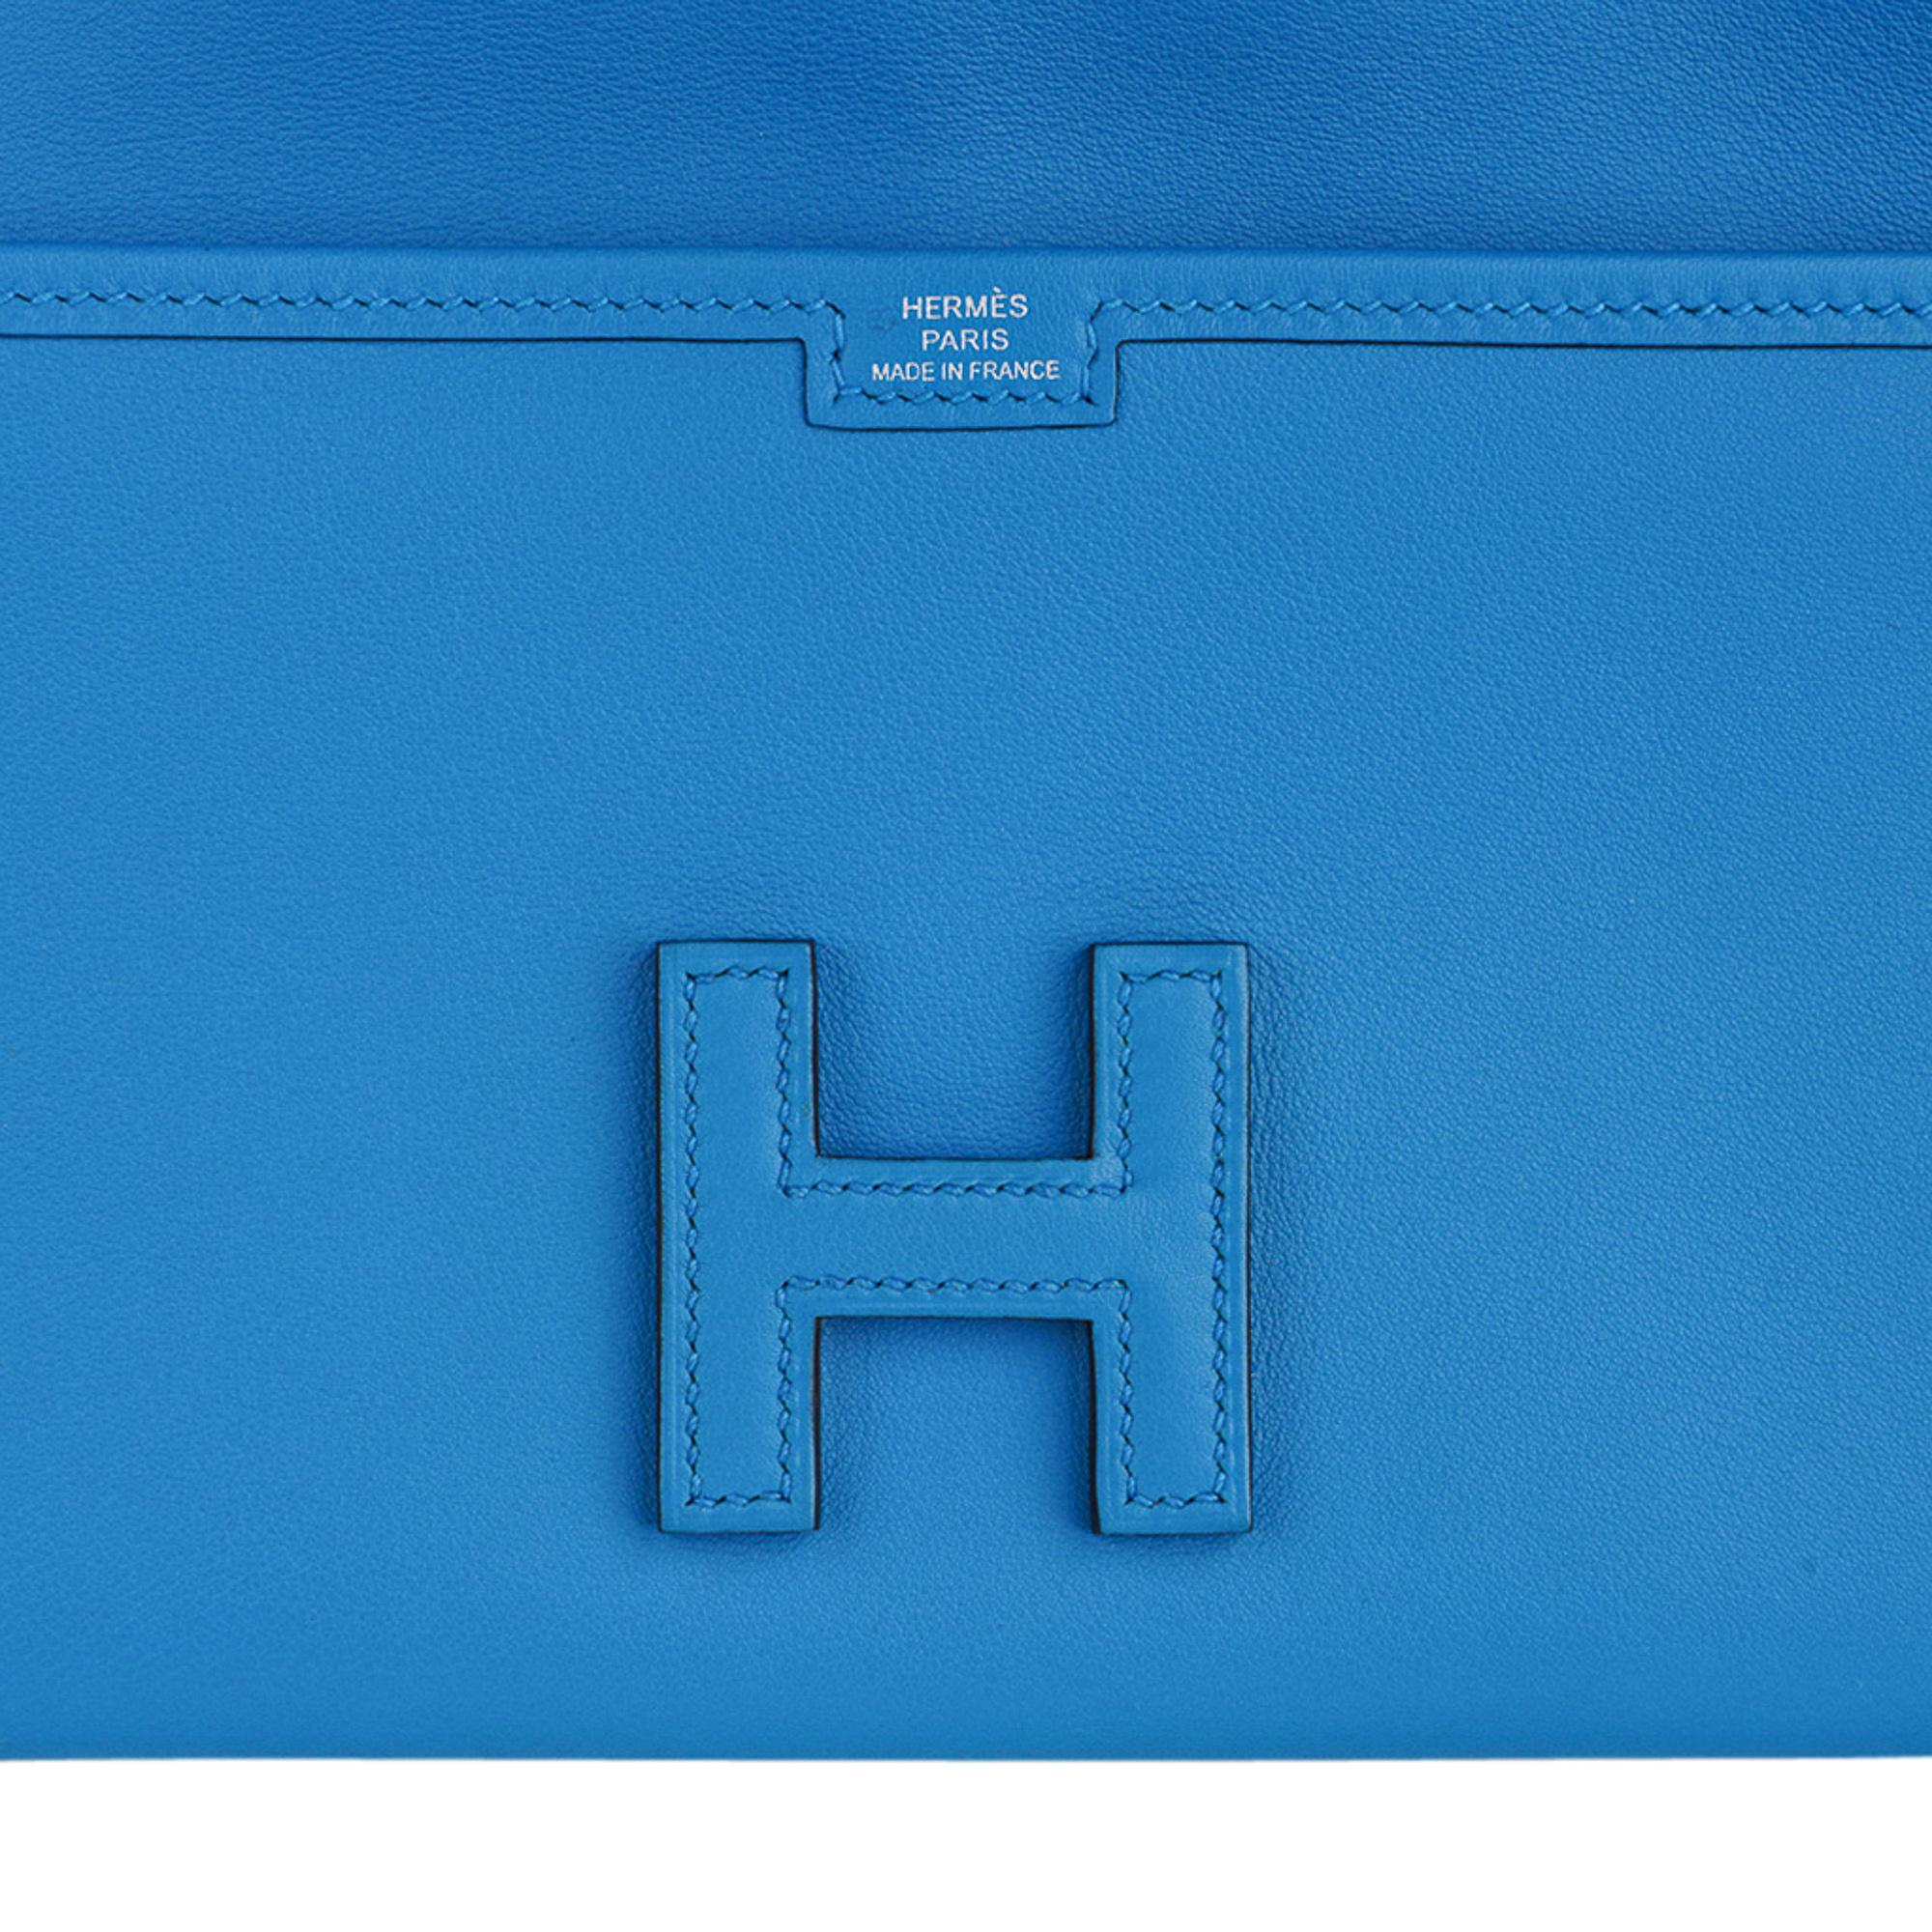 Mightychic offers a guaranteed authentic Hermes Jige Duo Wallet featured in vivid Blue Zanzibar Swift Leather.
This Hermes long wallet also doubles as a clutch.
Signature H with strap for closure.
Two interior slot pockets.
Removable change purse